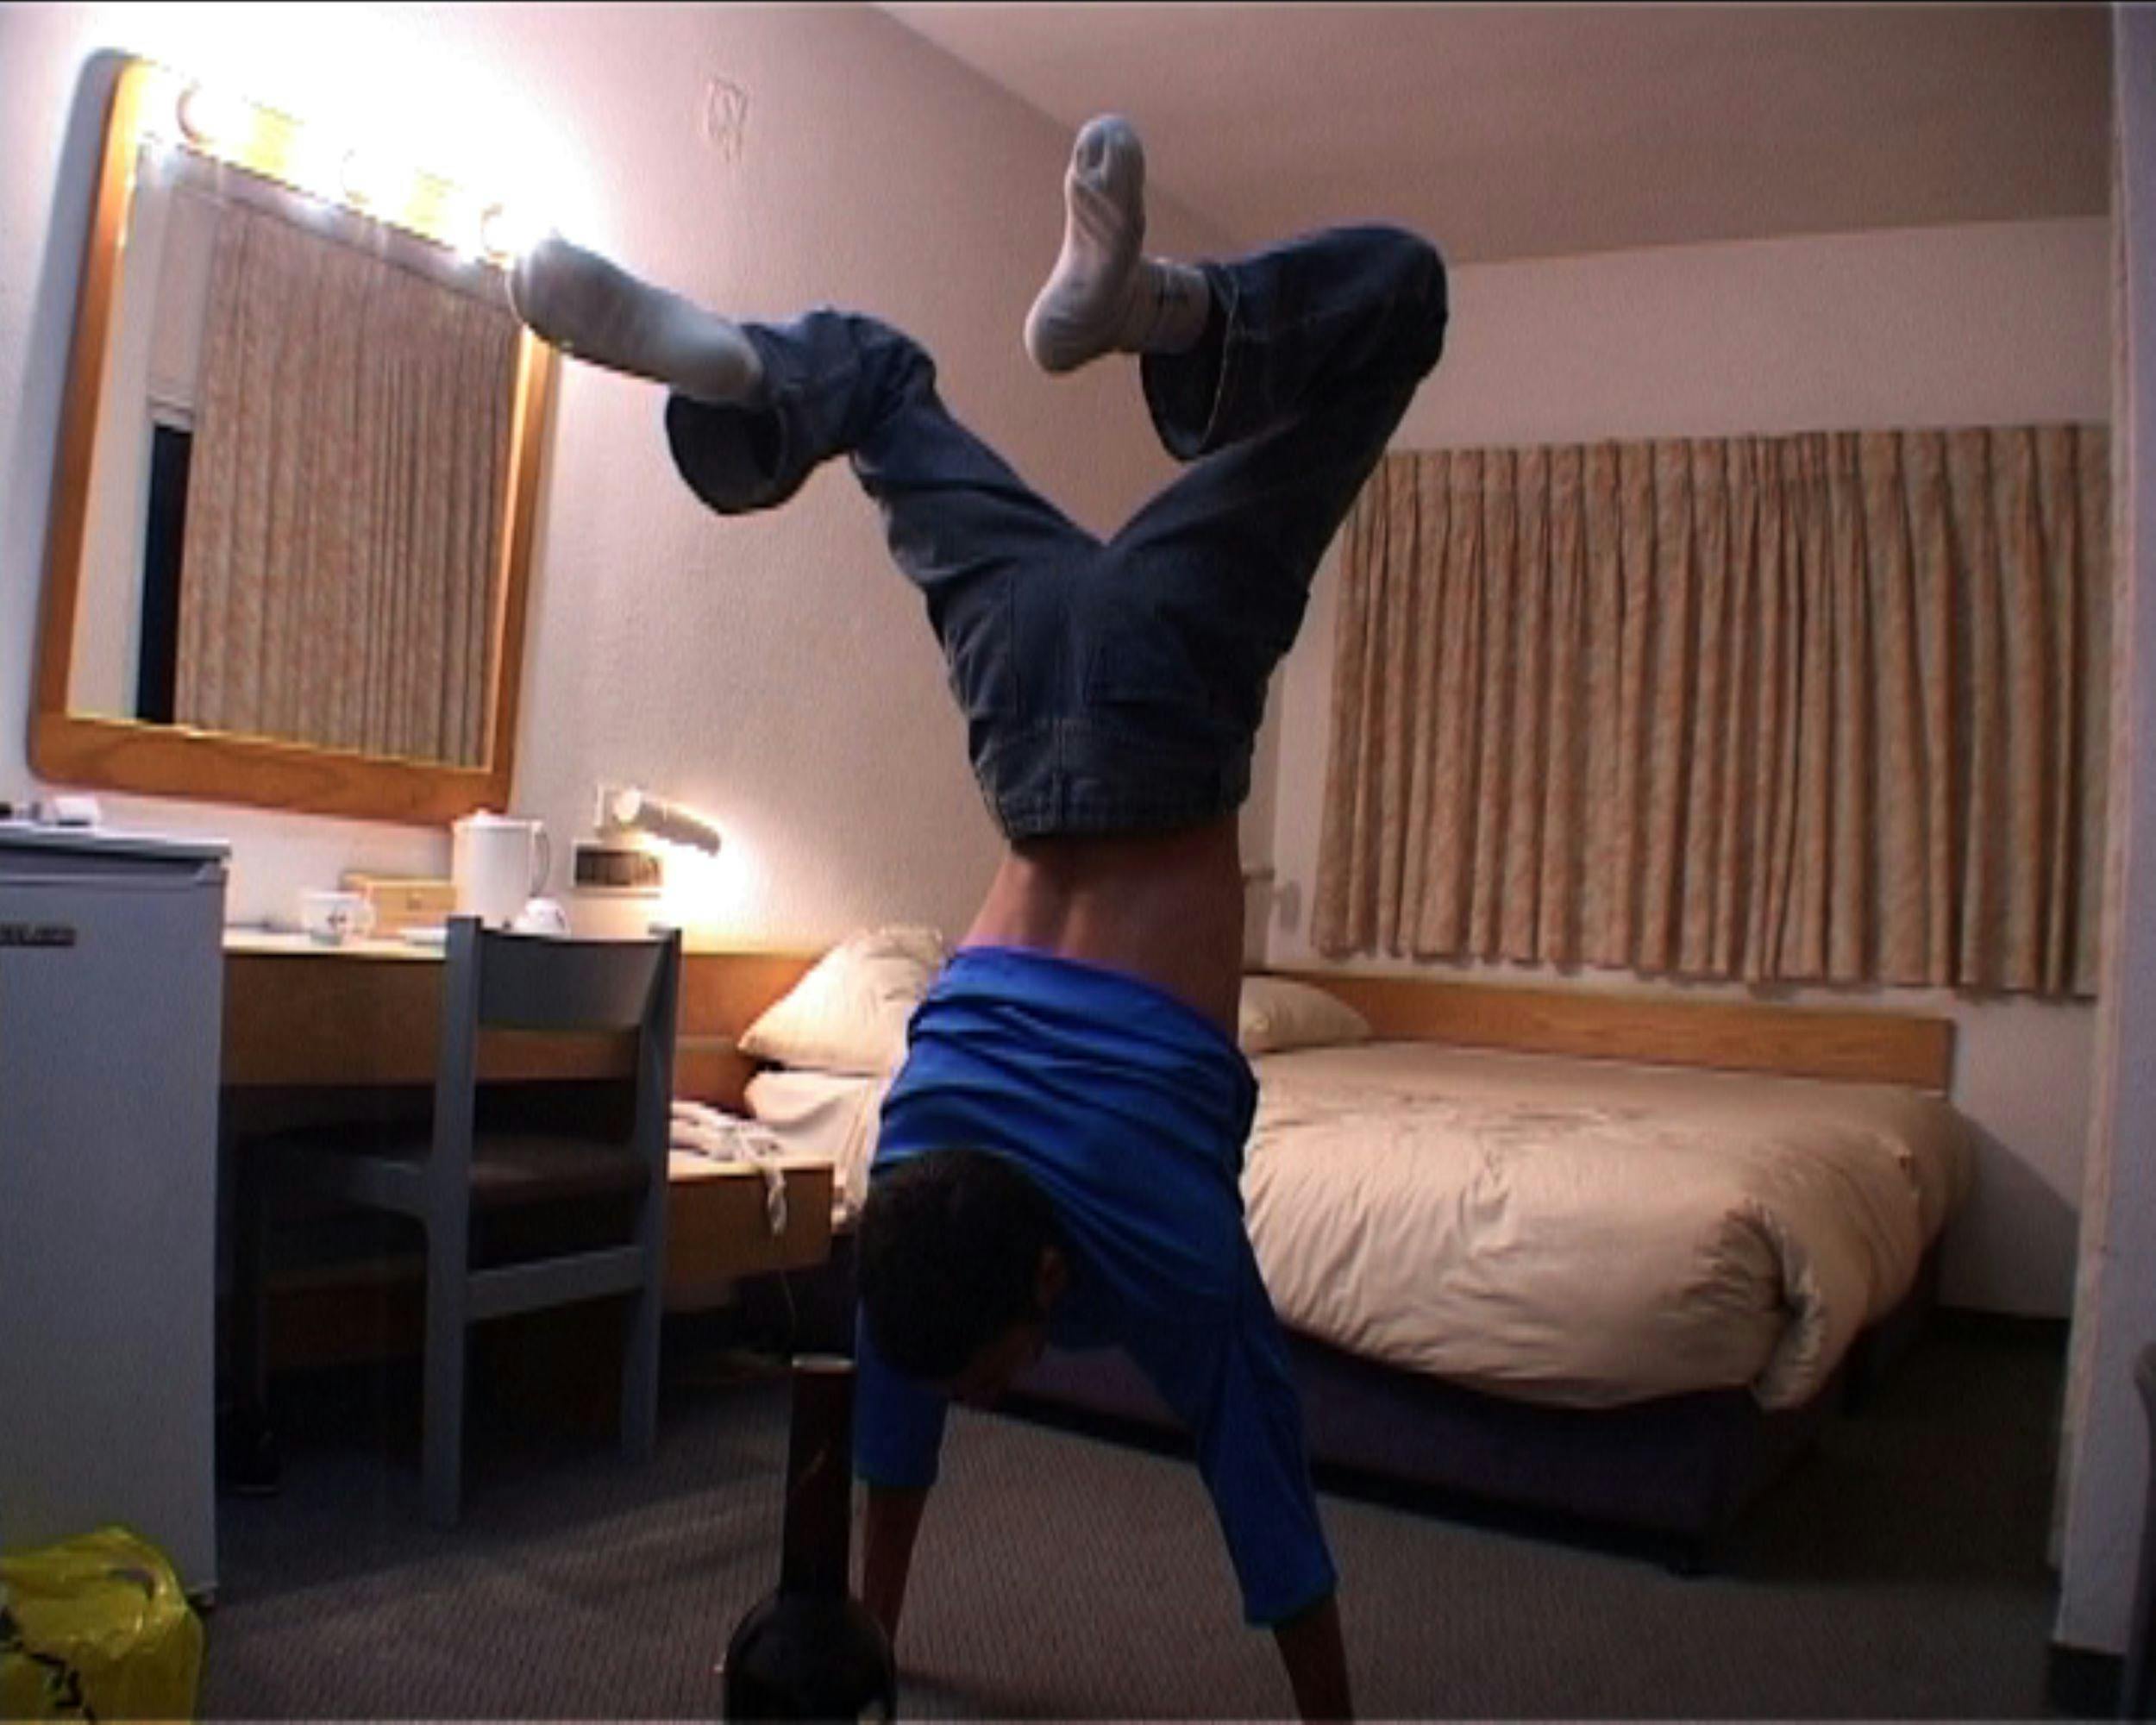 A low-fi video still of a person doing a handstand in a simple room with a beige bed and curtains, a desk, mirror, and mini fridge. A bottle is in the foreground of the image in front of the person.